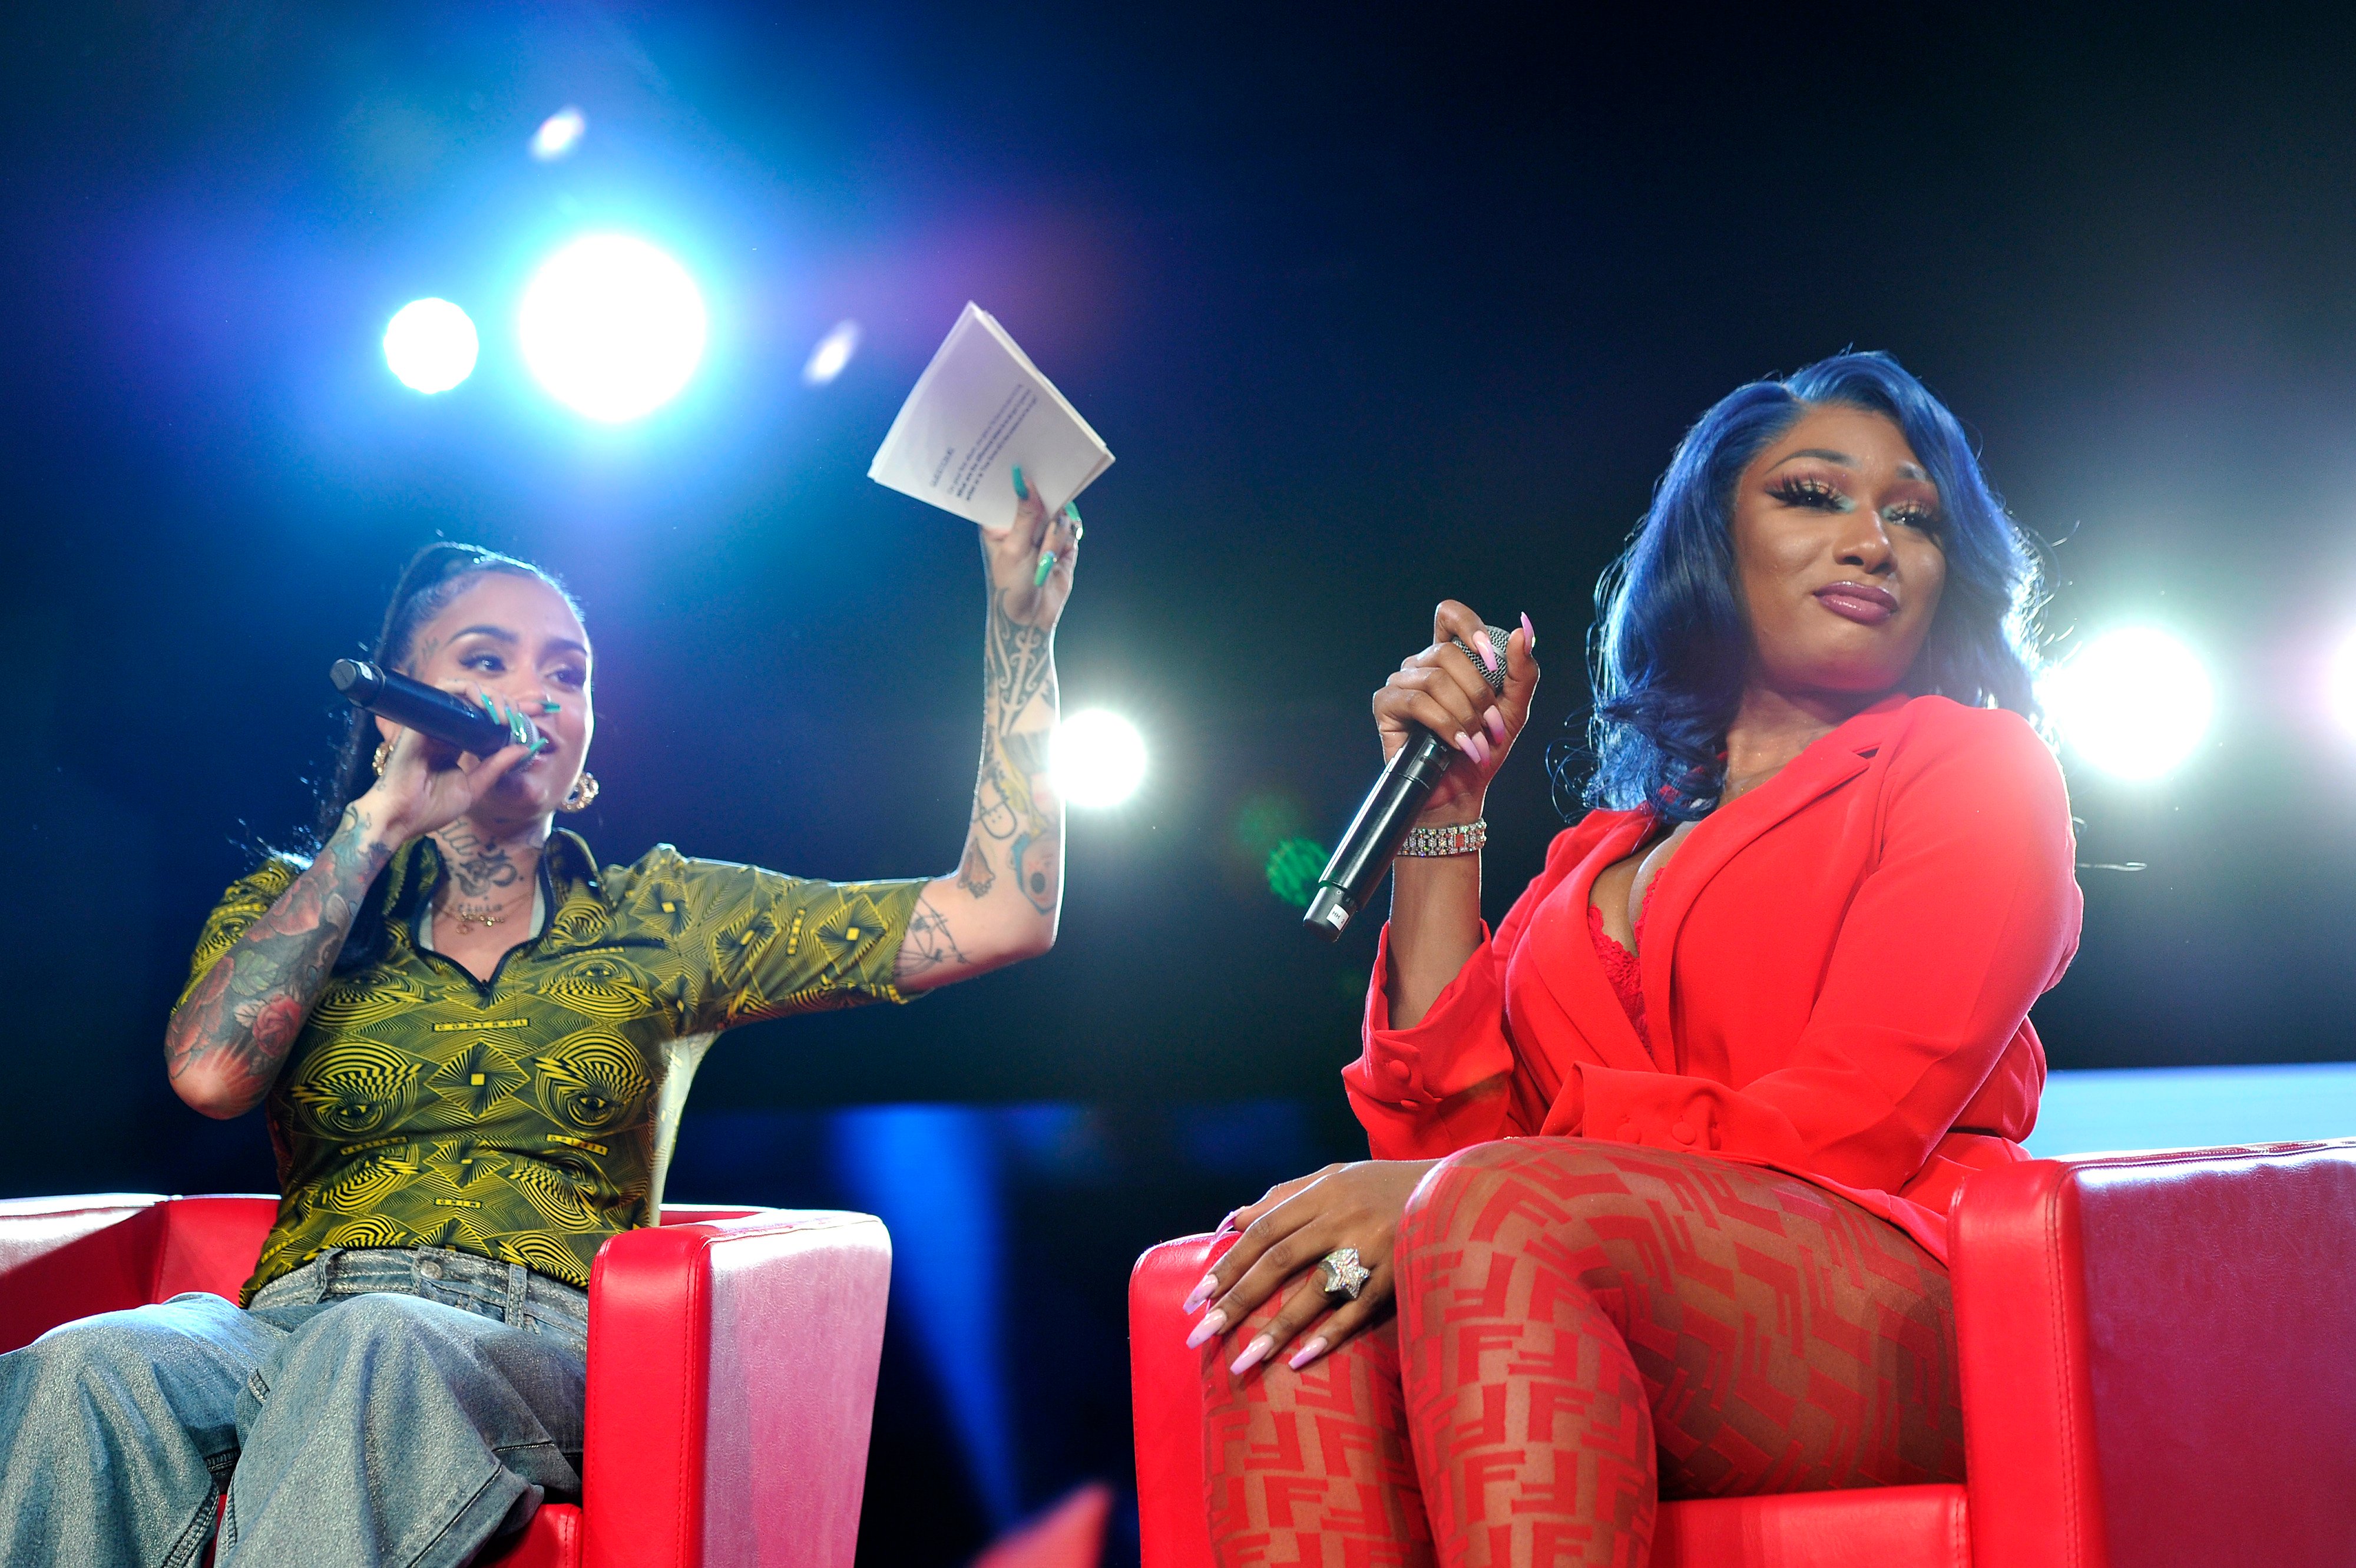 Kehlani and Megan Thee Stallion speak onstage during Beautycon Festival Los Angeles 2019 at Los Angeles Convention Center on August 11, 2019 in Los Angeles, California. (